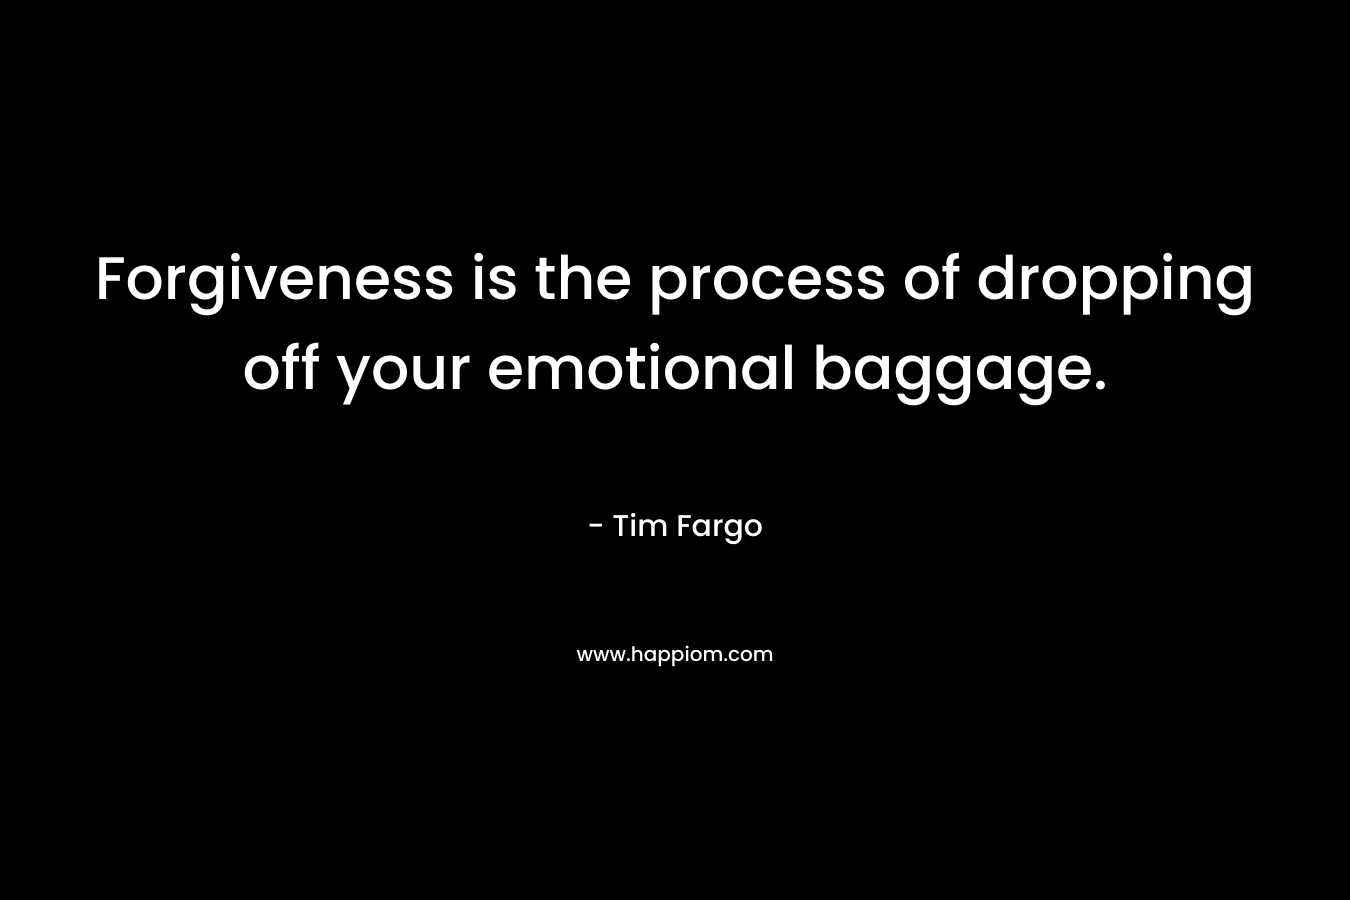 Forgiveness is the process of dropping off your emotional baggage.